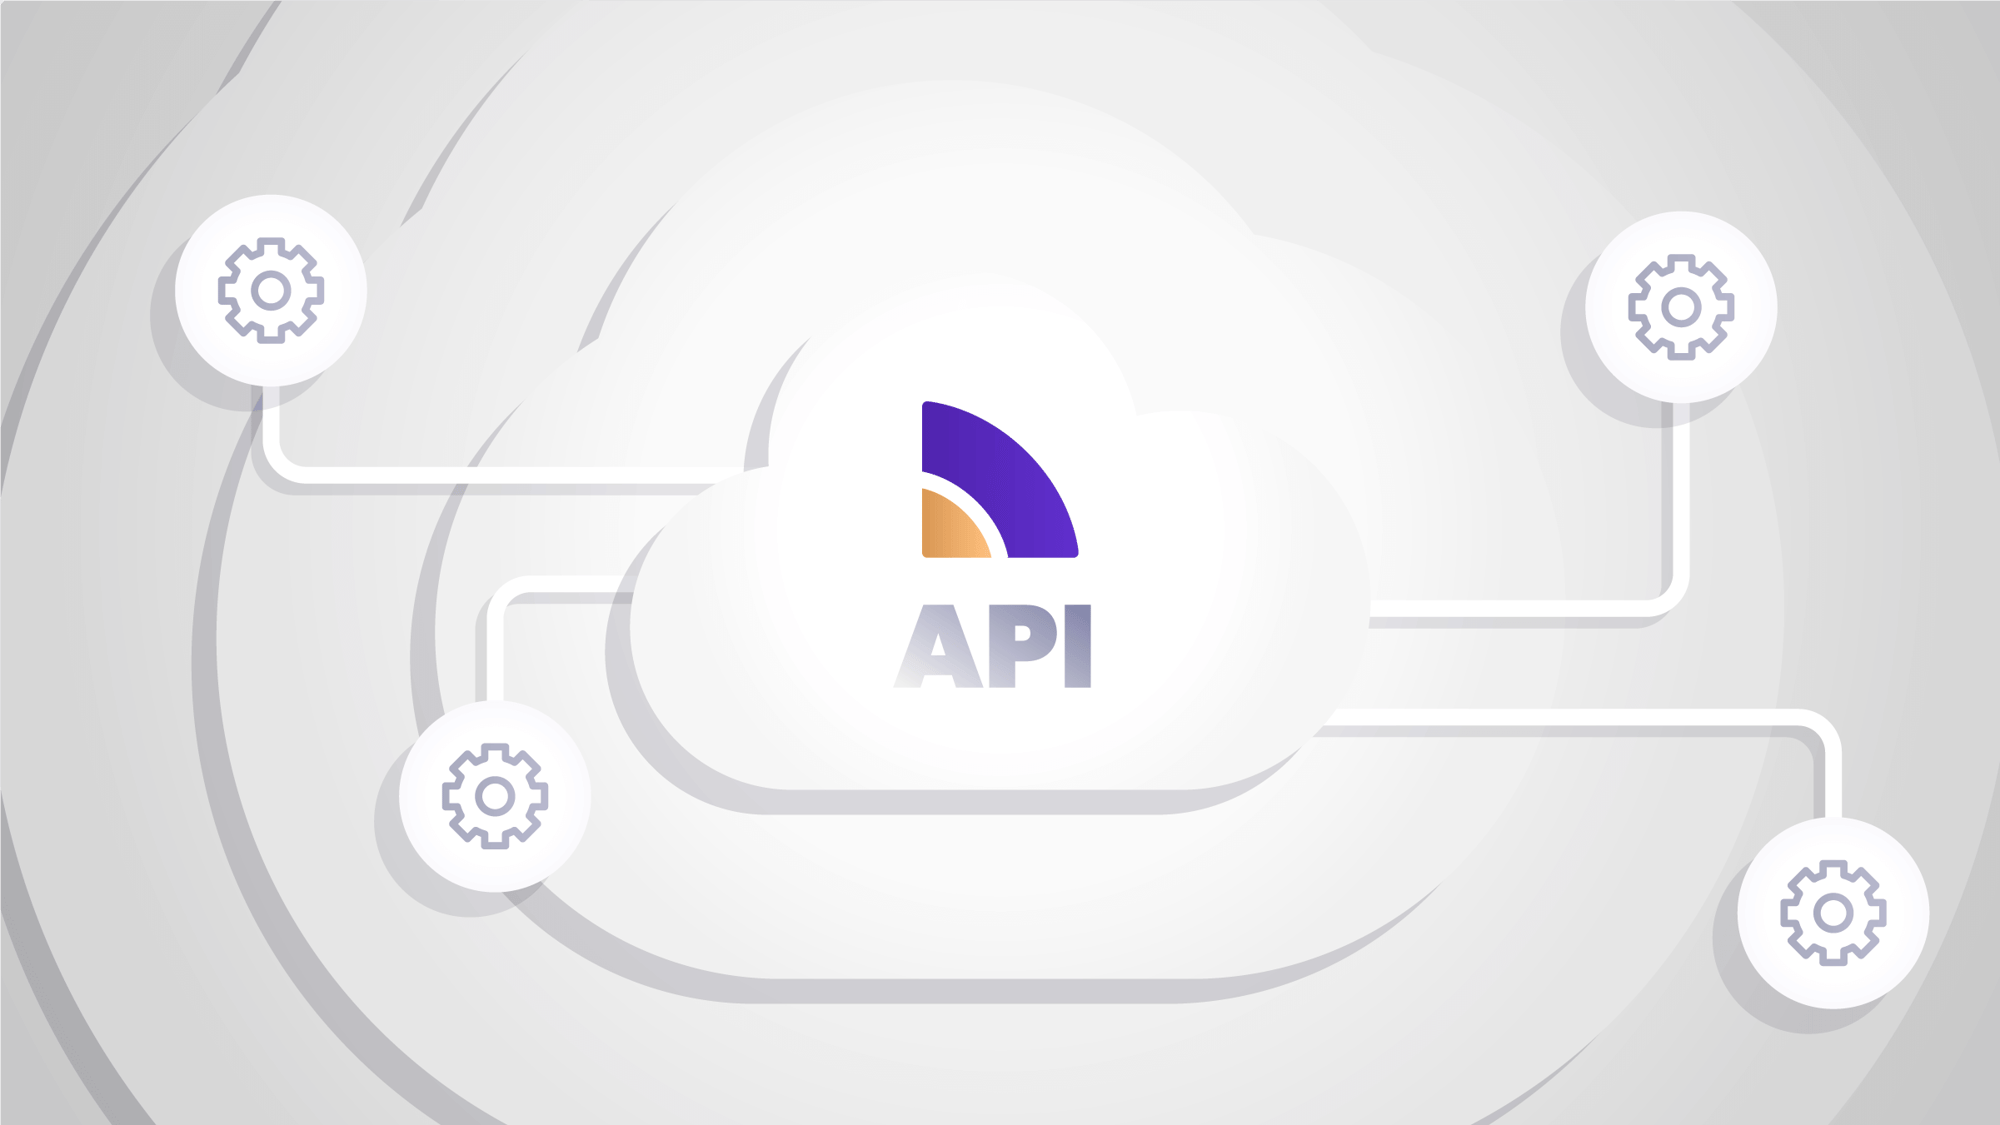 The Sightline logo and the label 'API' inside a white cloud that branches off to four white circles, each with a single gray gear icons inside.